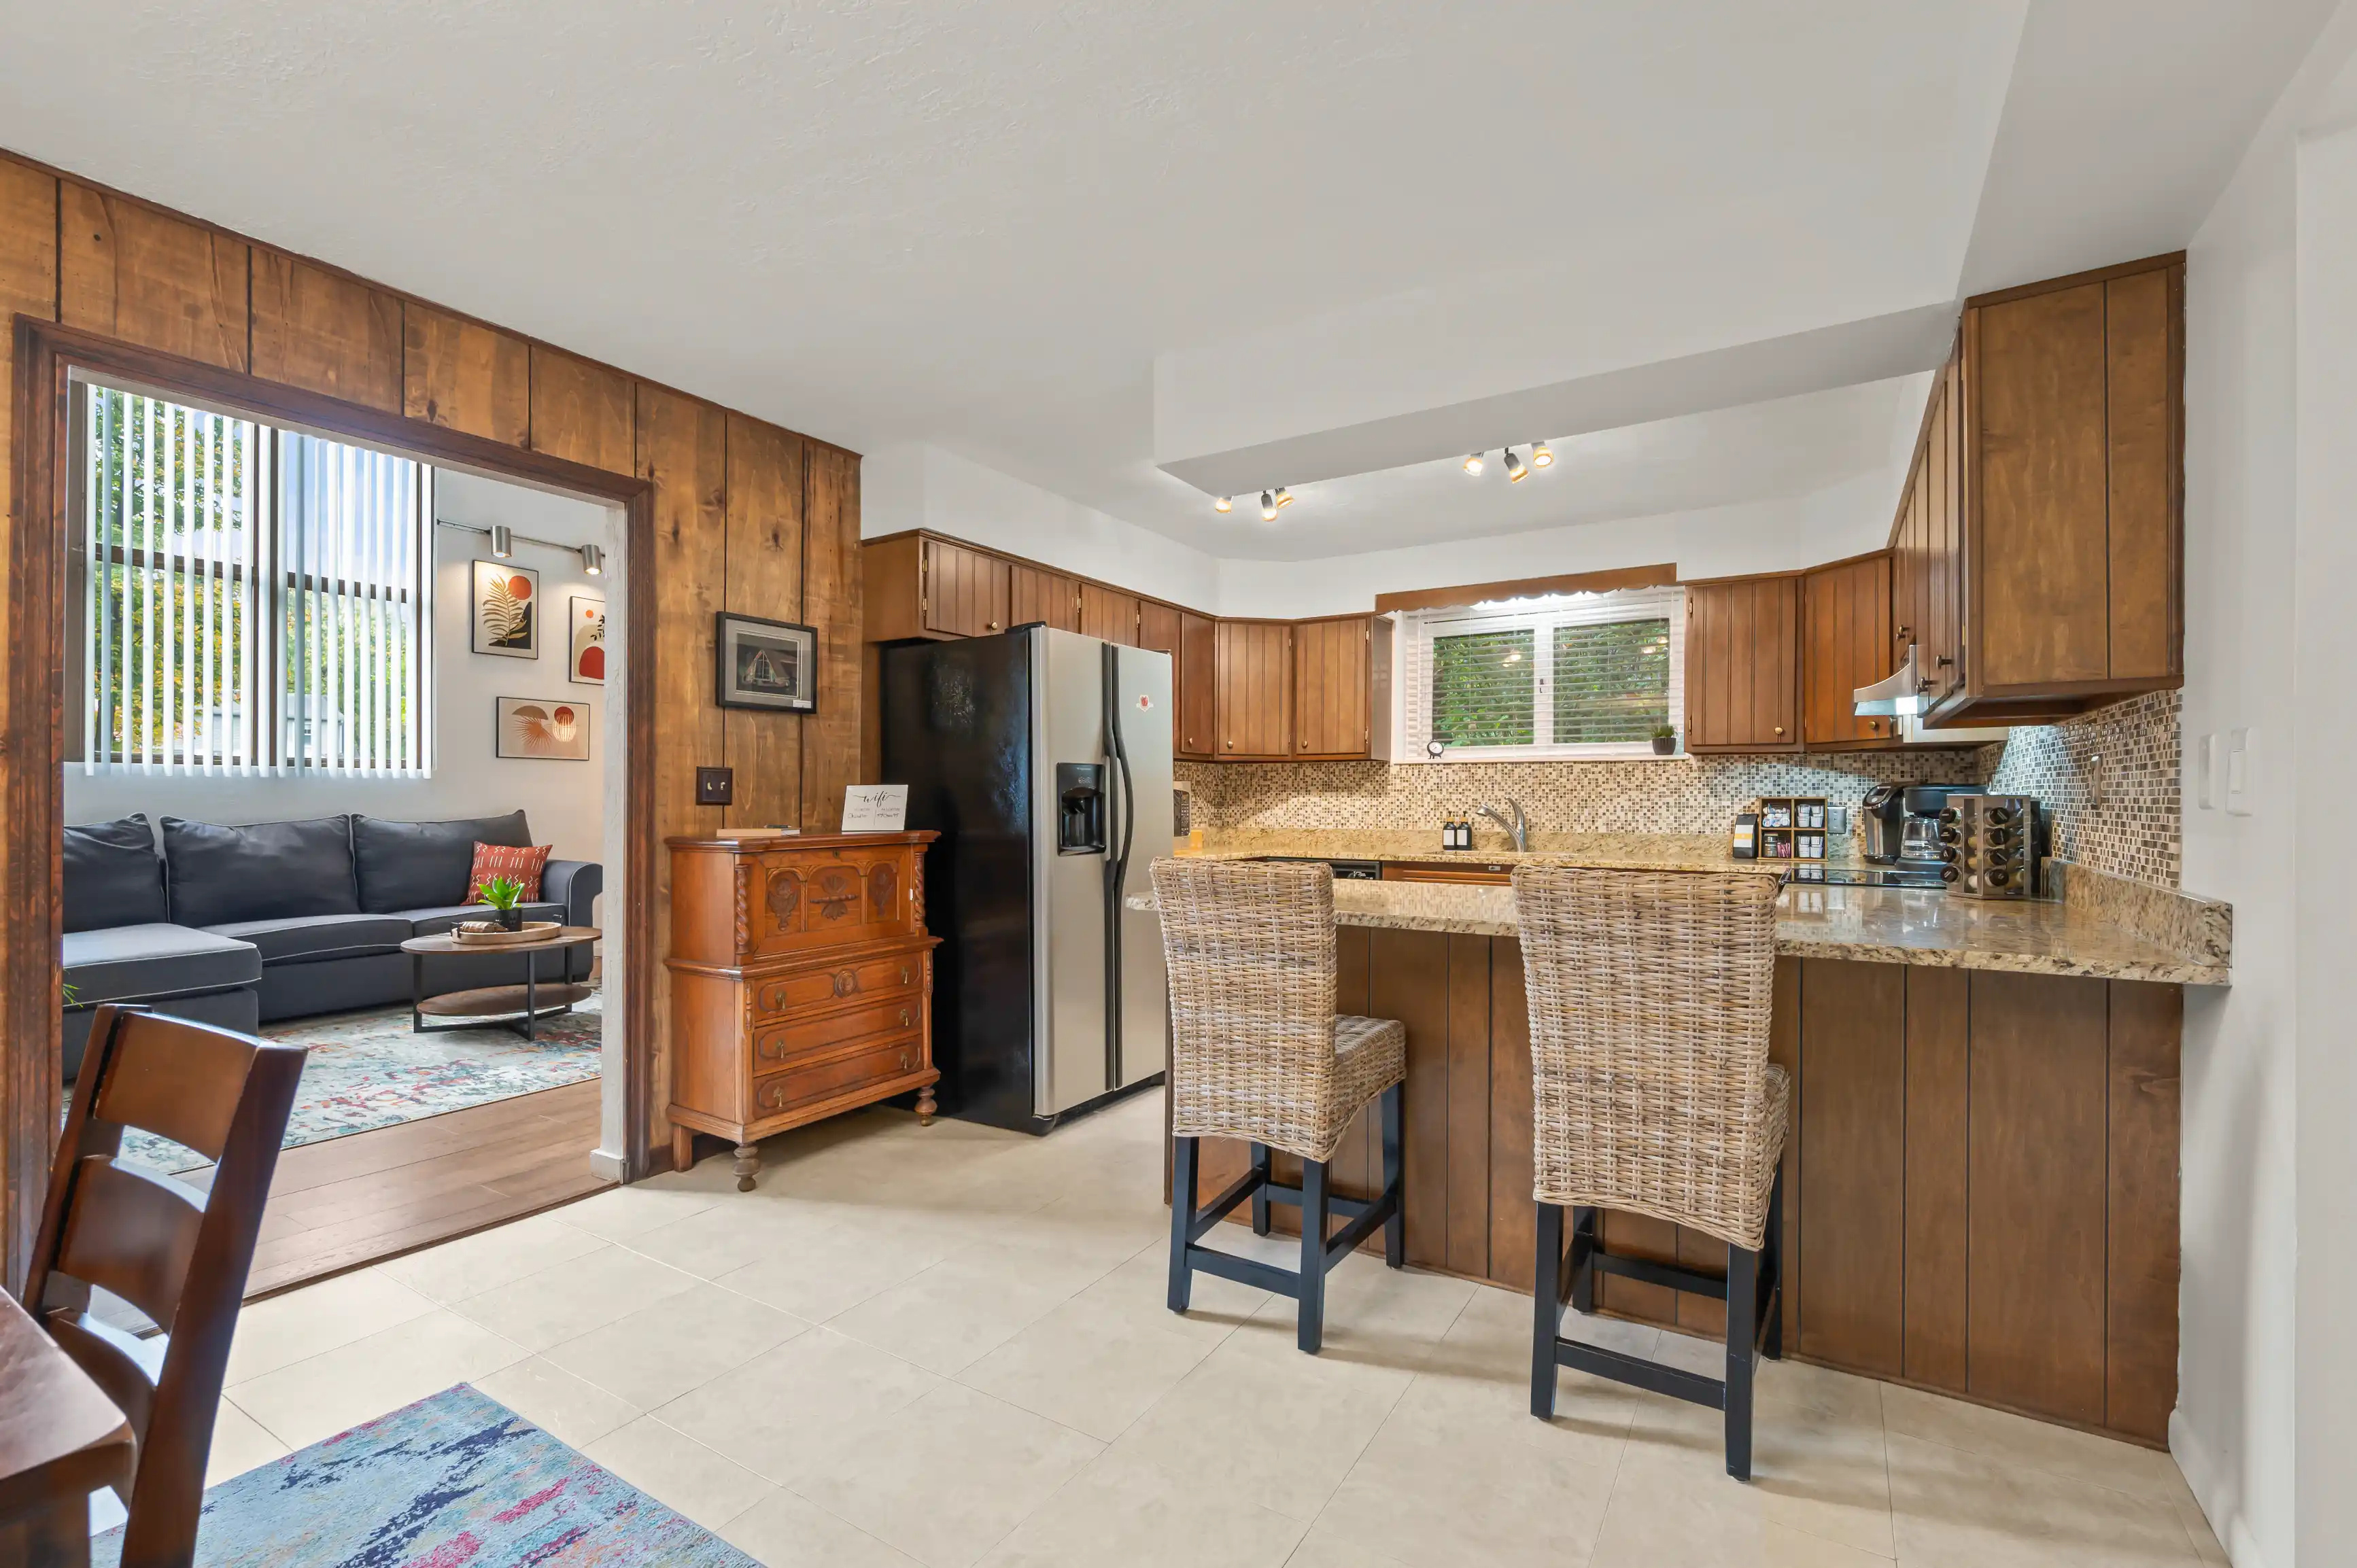 Spacious kitchen with wooden cabinets and modern appliances, featuring a tiled backsplash and a bar seating area with wicker stools. Adjacent area reveals a cozy living room with a dark leather sofa and decorative art on the walls.